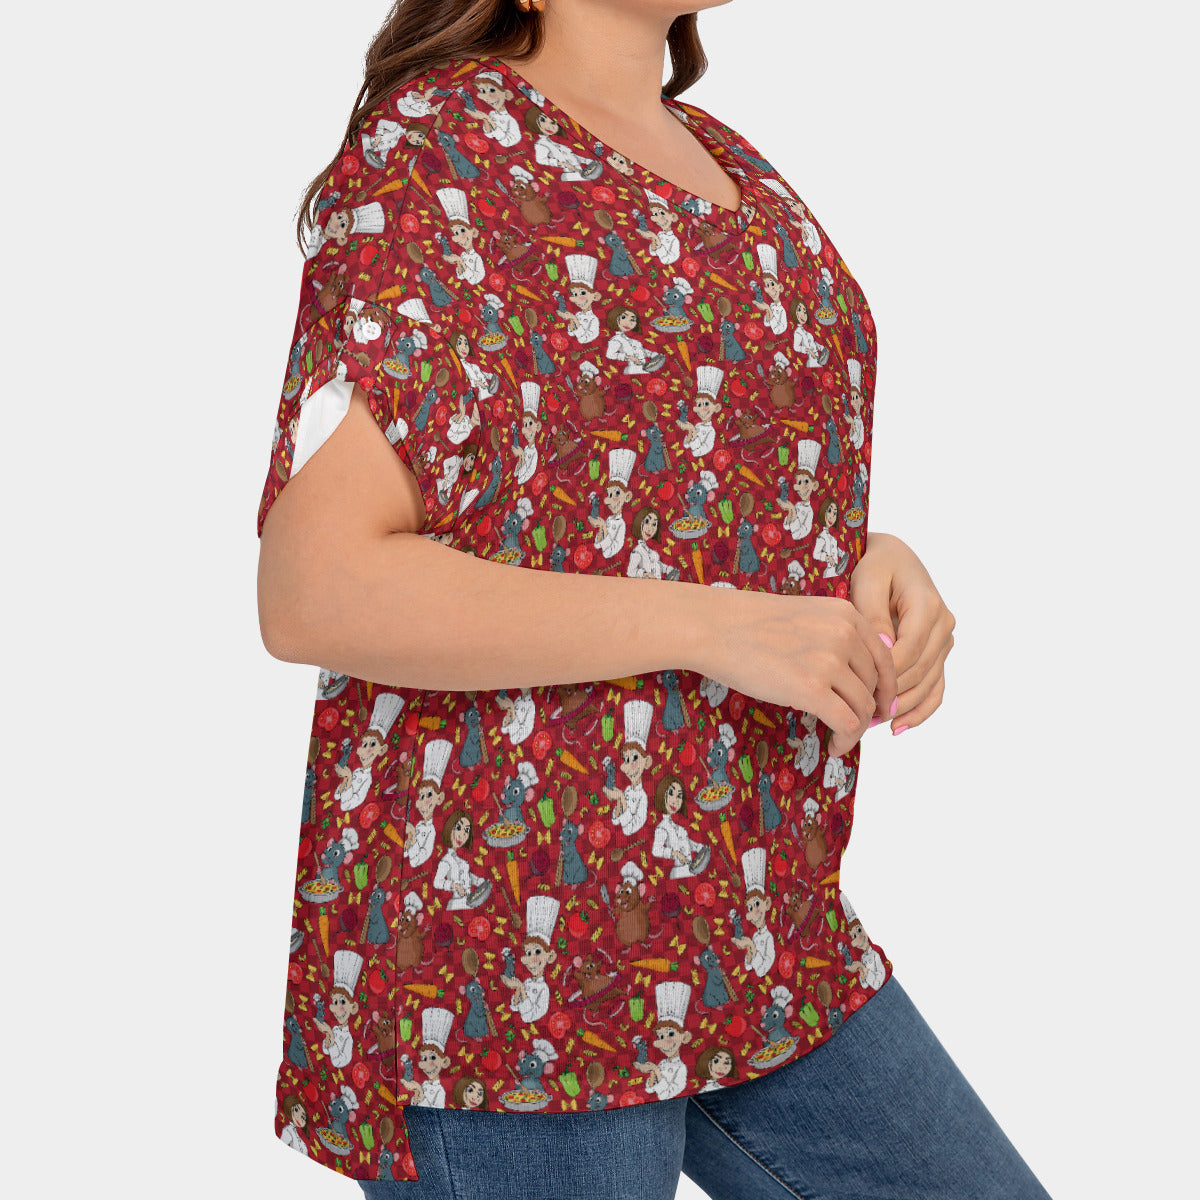 Ratatouille Women's Plus Size Short Sleeve T-shirt With Sleeve Loops